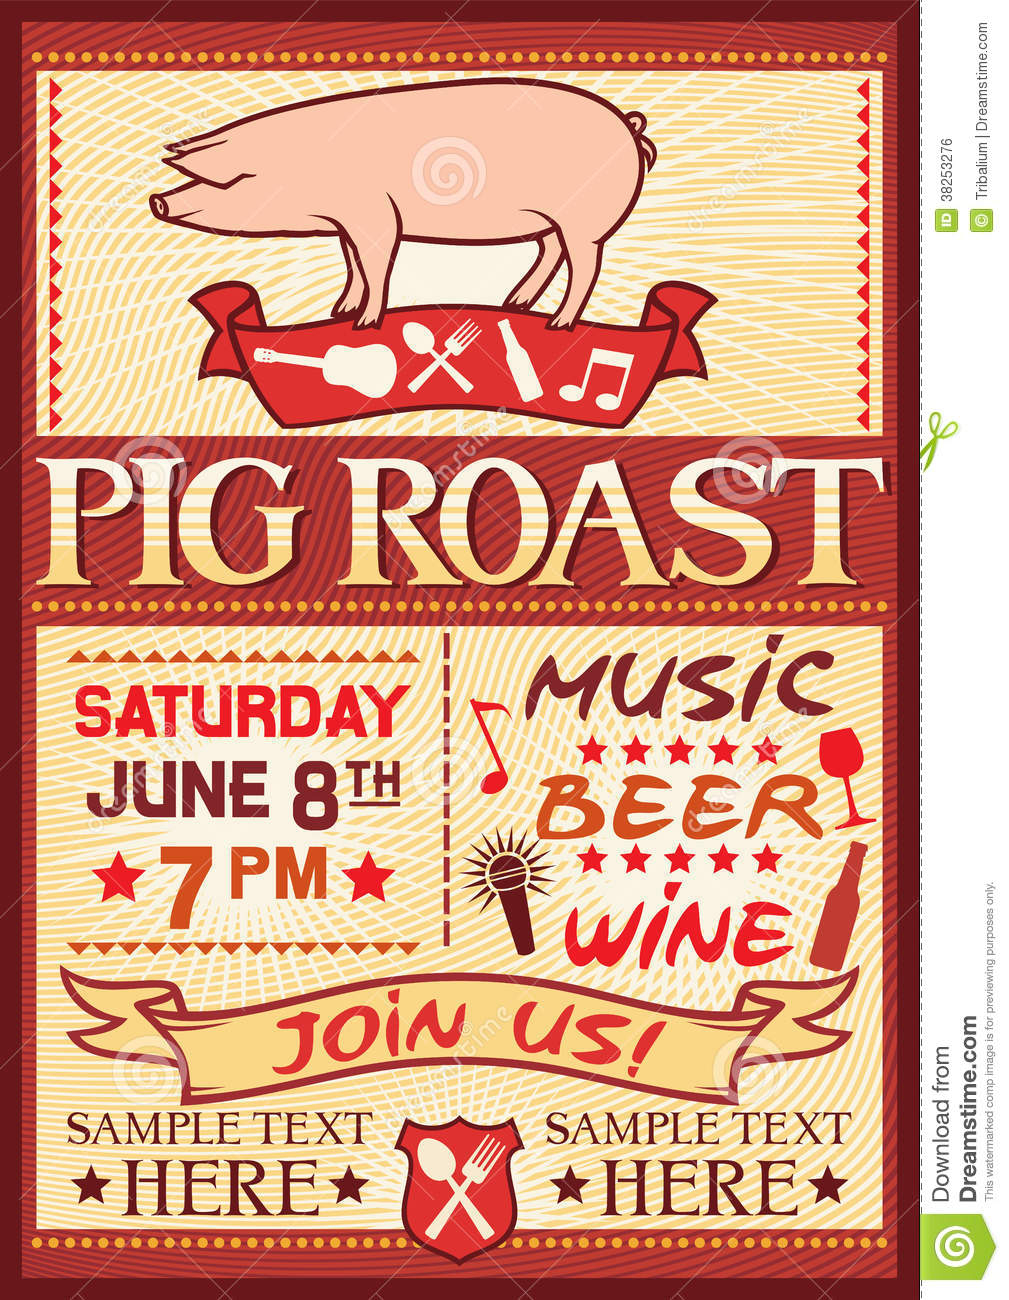 Pig roast poster stock vector With Regard To Pig Roast Flyer Template